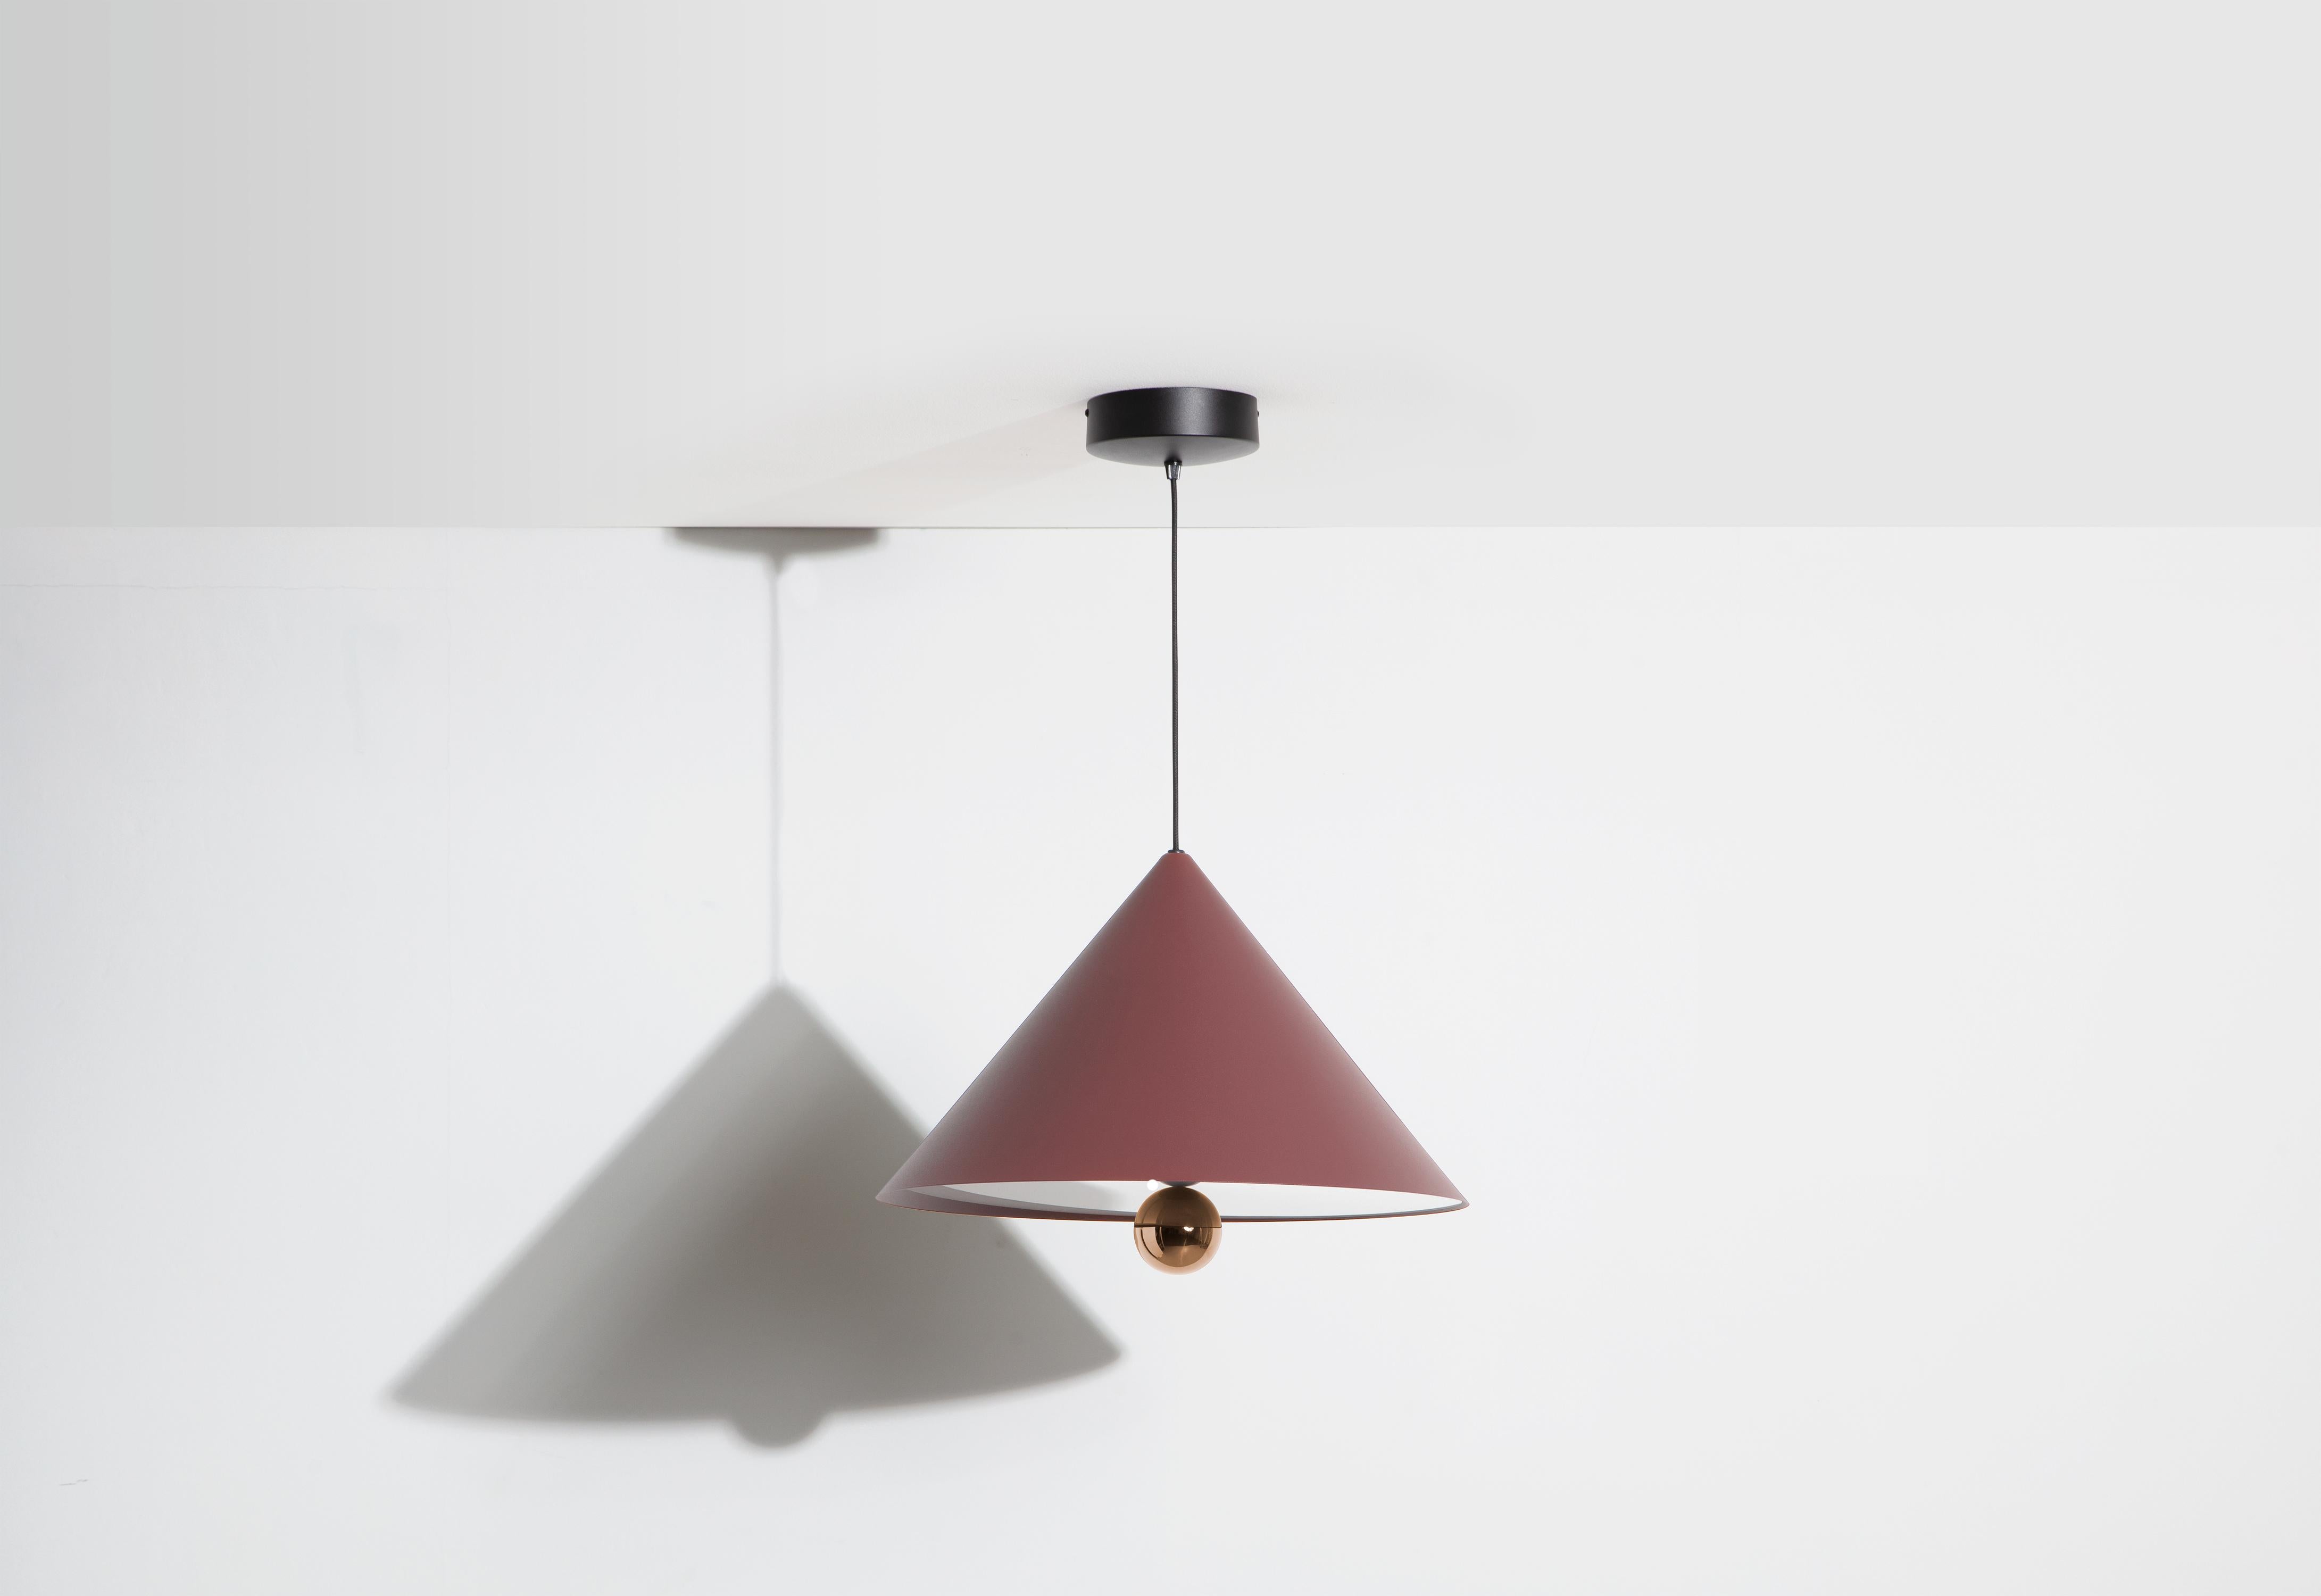 Petite Friture Large Cherry LED Pendant Light in Brown-red & Pink Gold Aluminium by Daniel and Emma, 2020

In 2015, the Australian duo designers Daniel and Emma signed Cherry a simple and minimalist pendant lamp design ; an aluminum cone with a